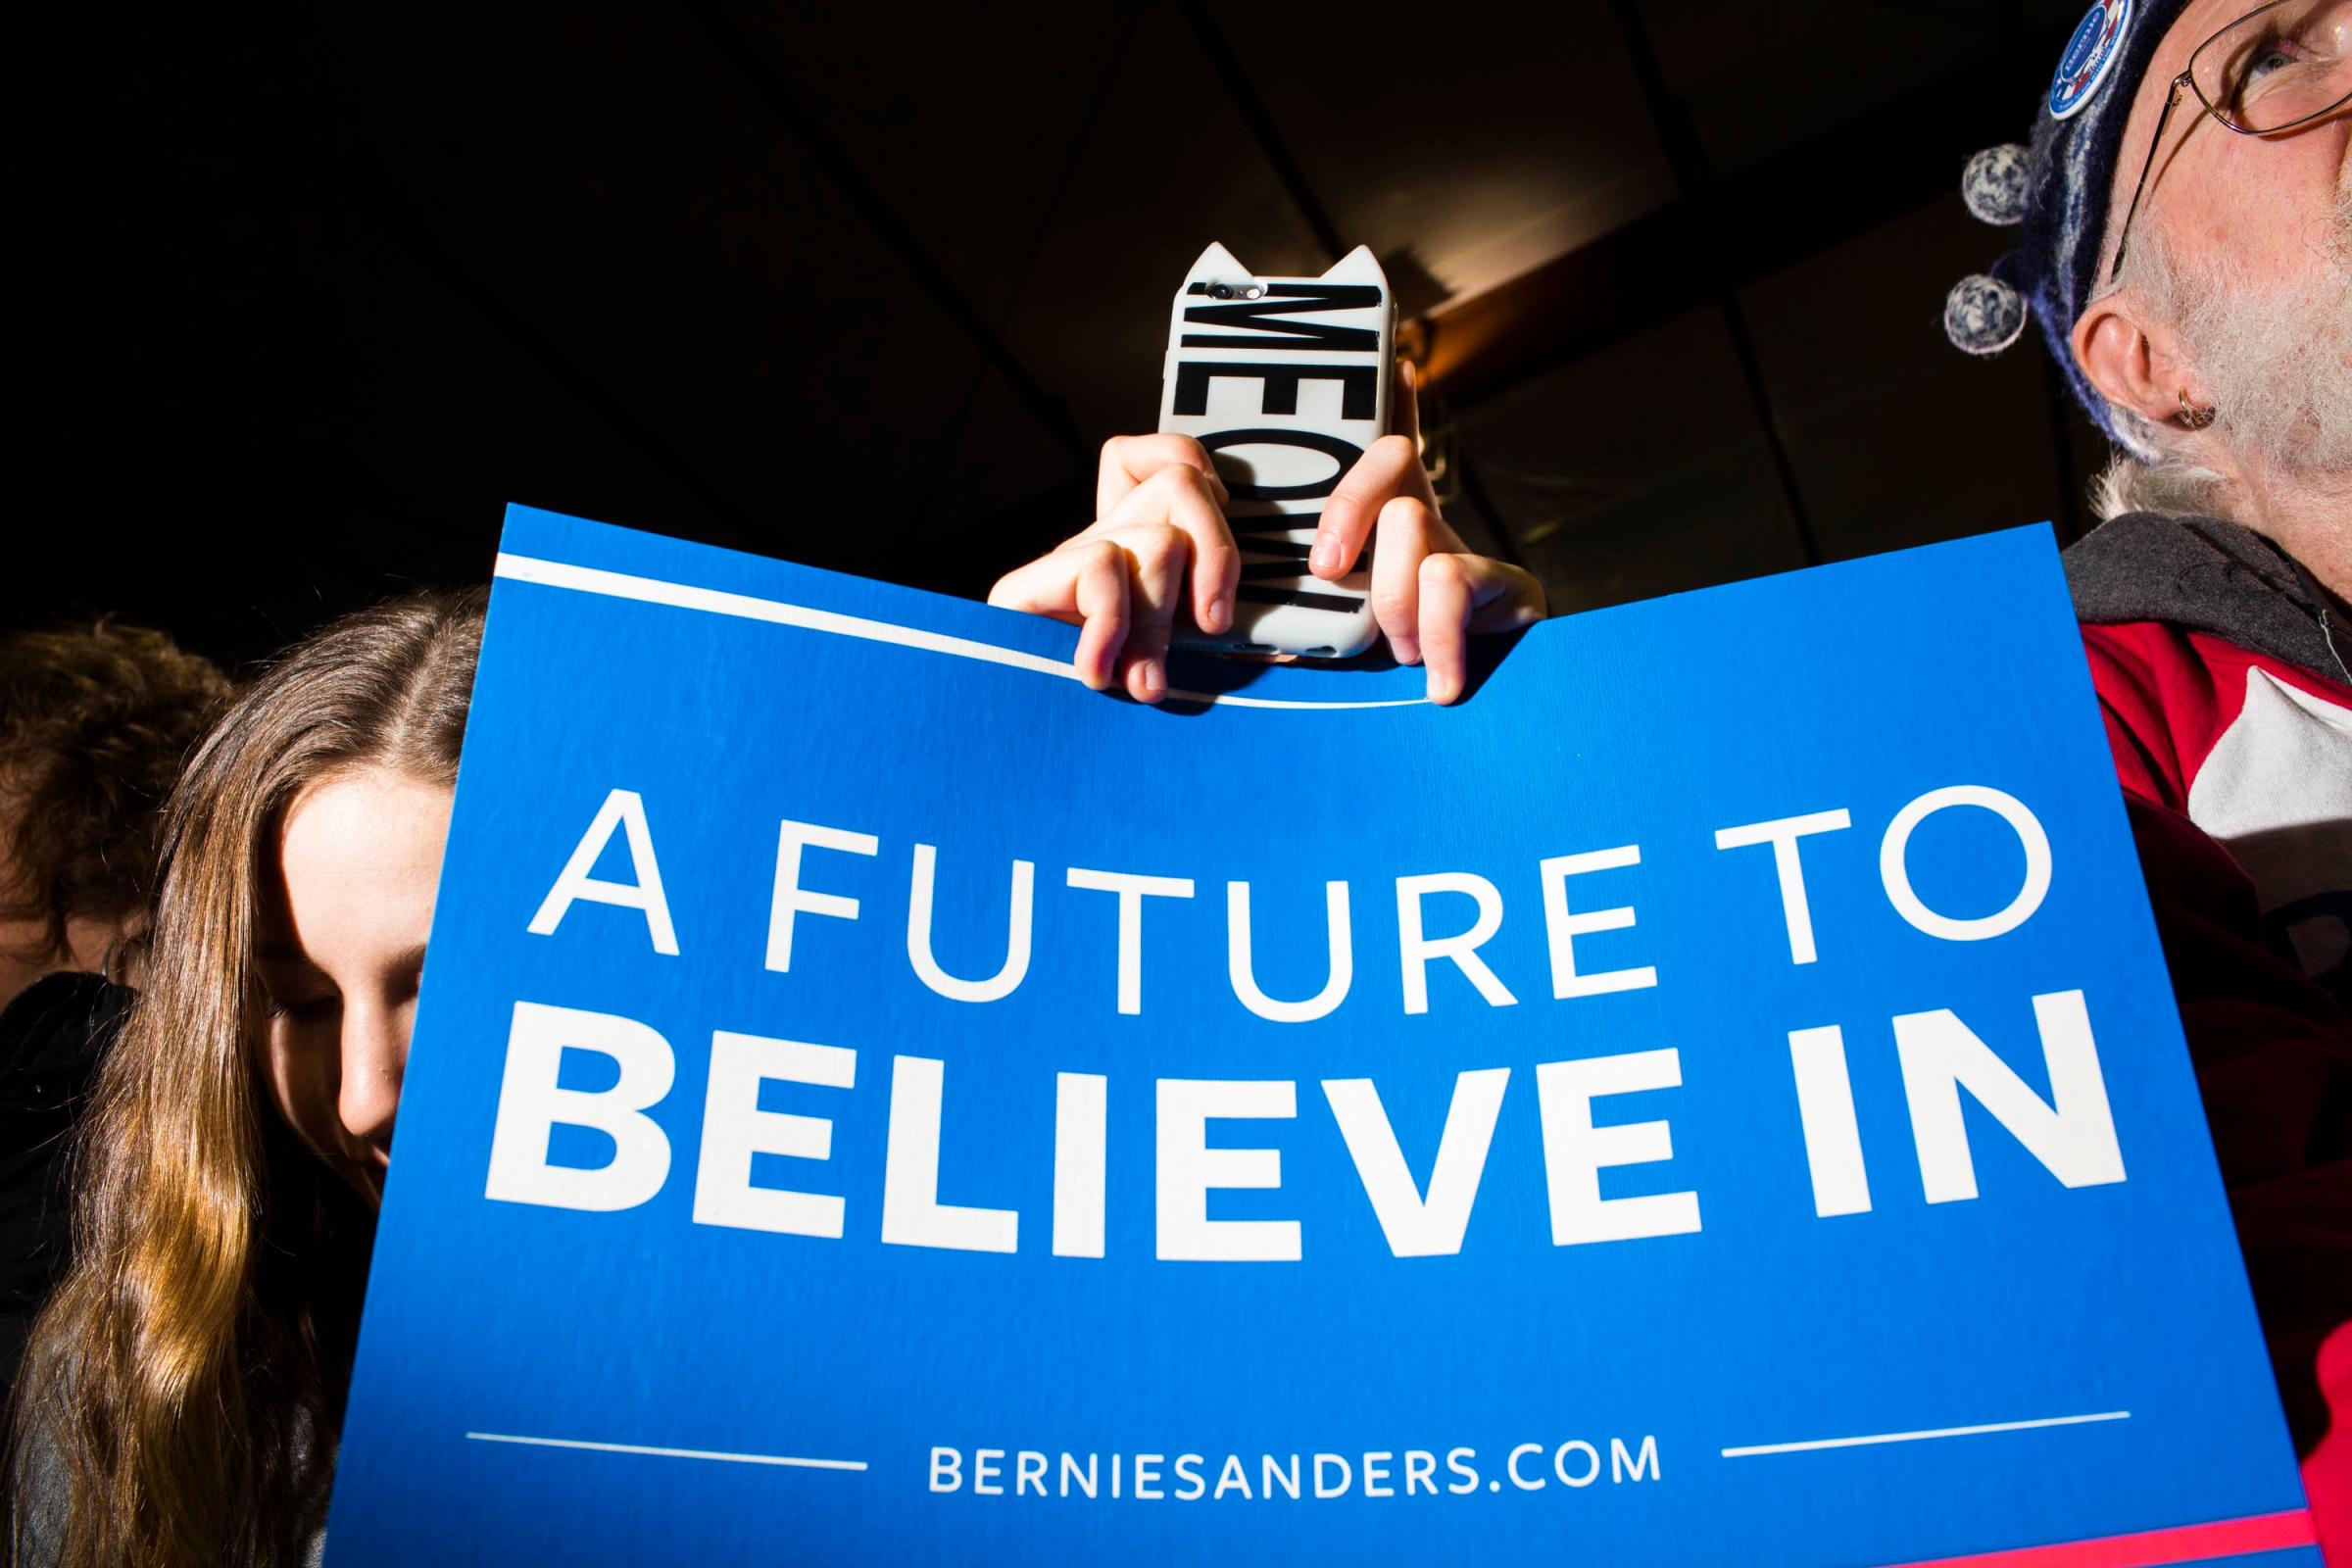 NASHUA, NH - FEB 8: 2016 Democratic presidential candidate Bernie Sanders speaks to attendees during a campaign event at Daniel Webster Community College on Monday, February 8, 2016, in Nashua, NH. (Photo by Landon Nordeman)